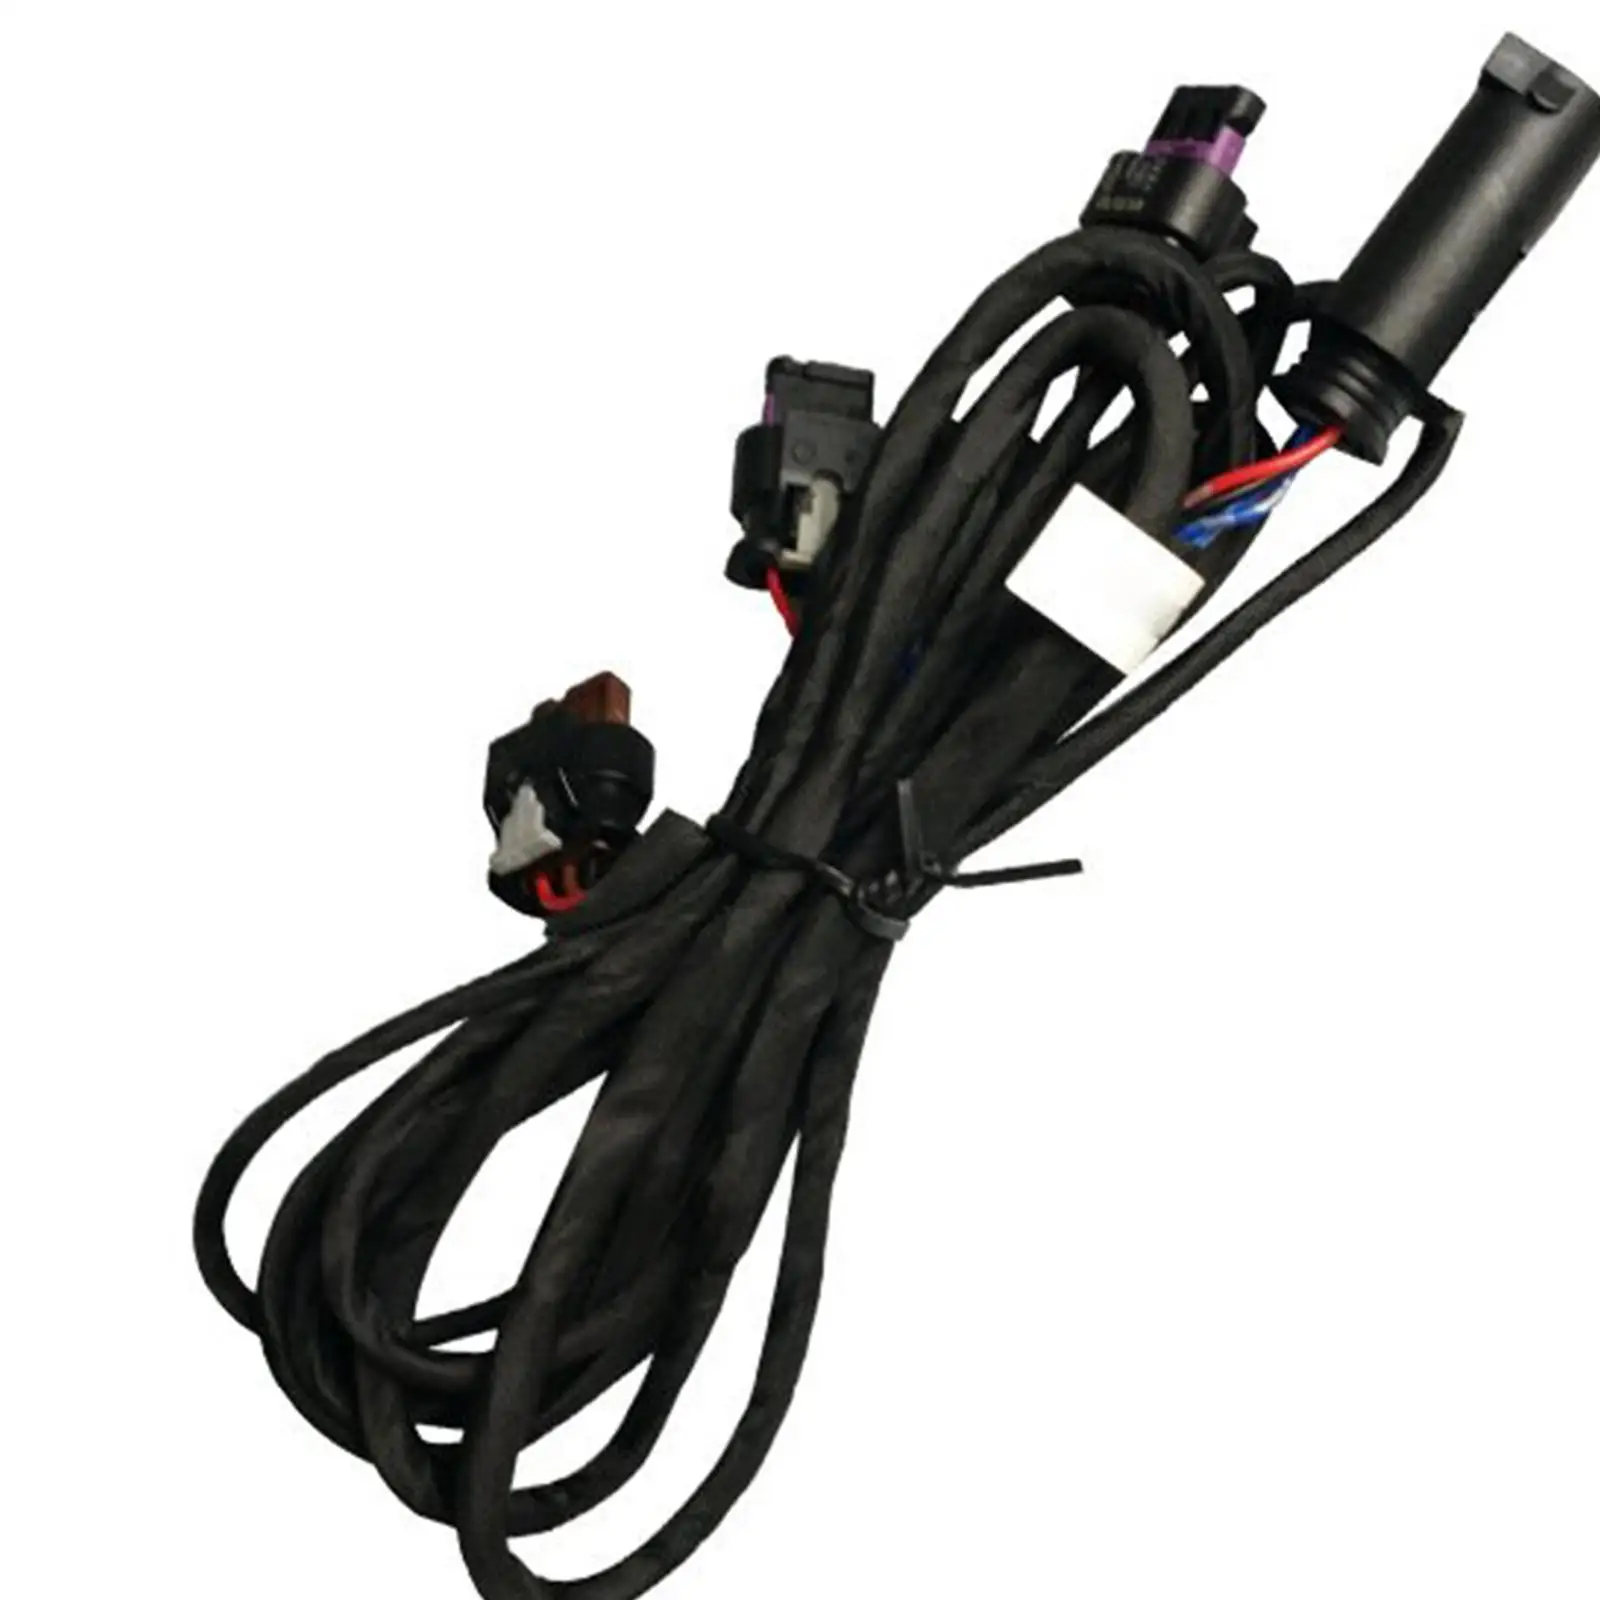 Parking Cables,Auto Accessory,Front Rear Wiring Harness Replaces for 3 Series 4 Series F80 M3 F30 Lci,Professional